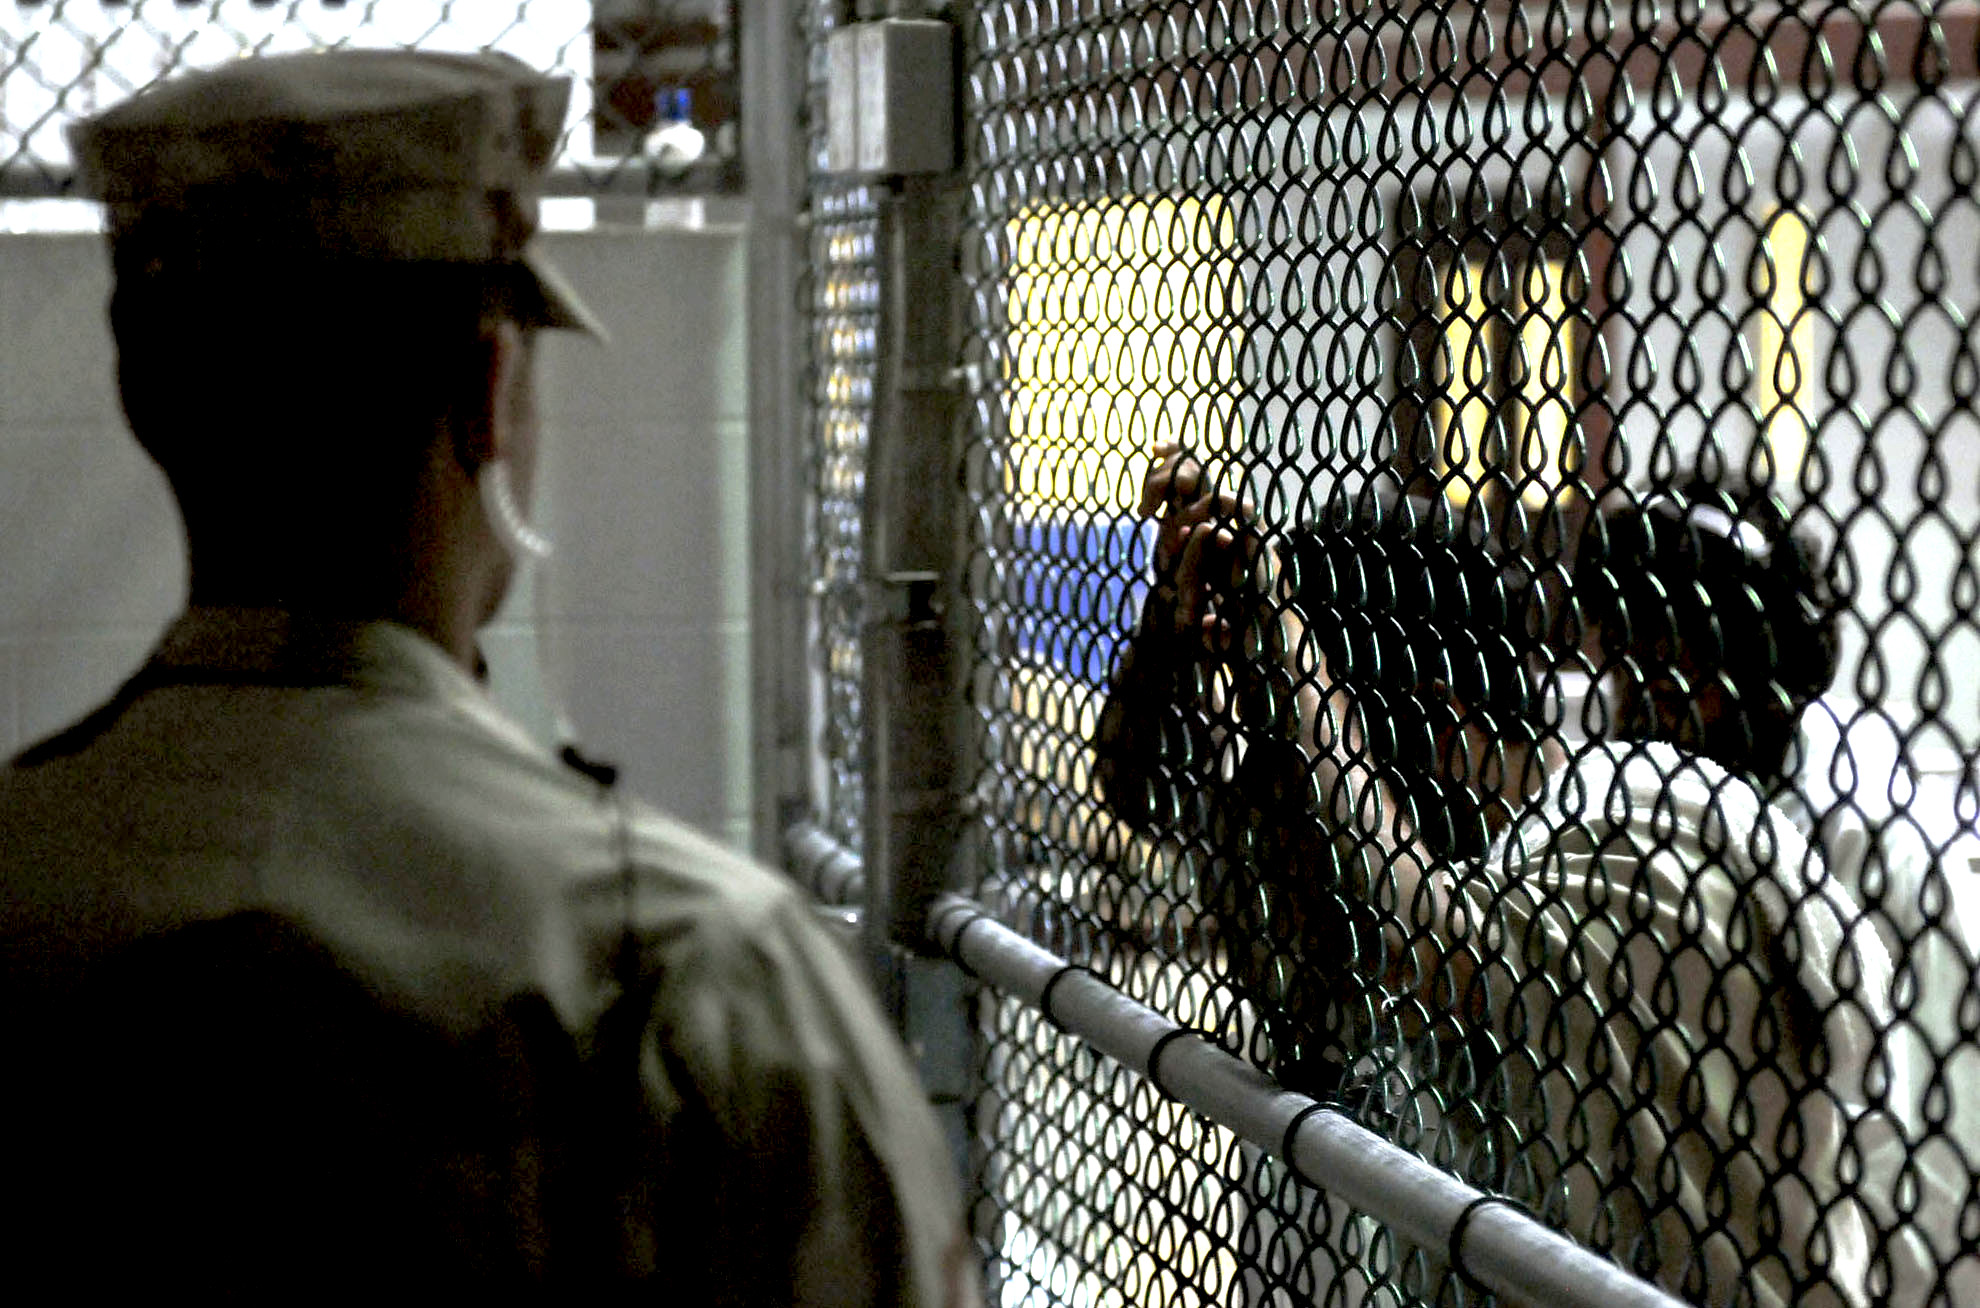 A US soldier watches over detainees in a cell block in the military prison at US Naval Station Guantanamo Bay, Cuba, March 30, 2010. Photo: US Navy/Joshua Nistas